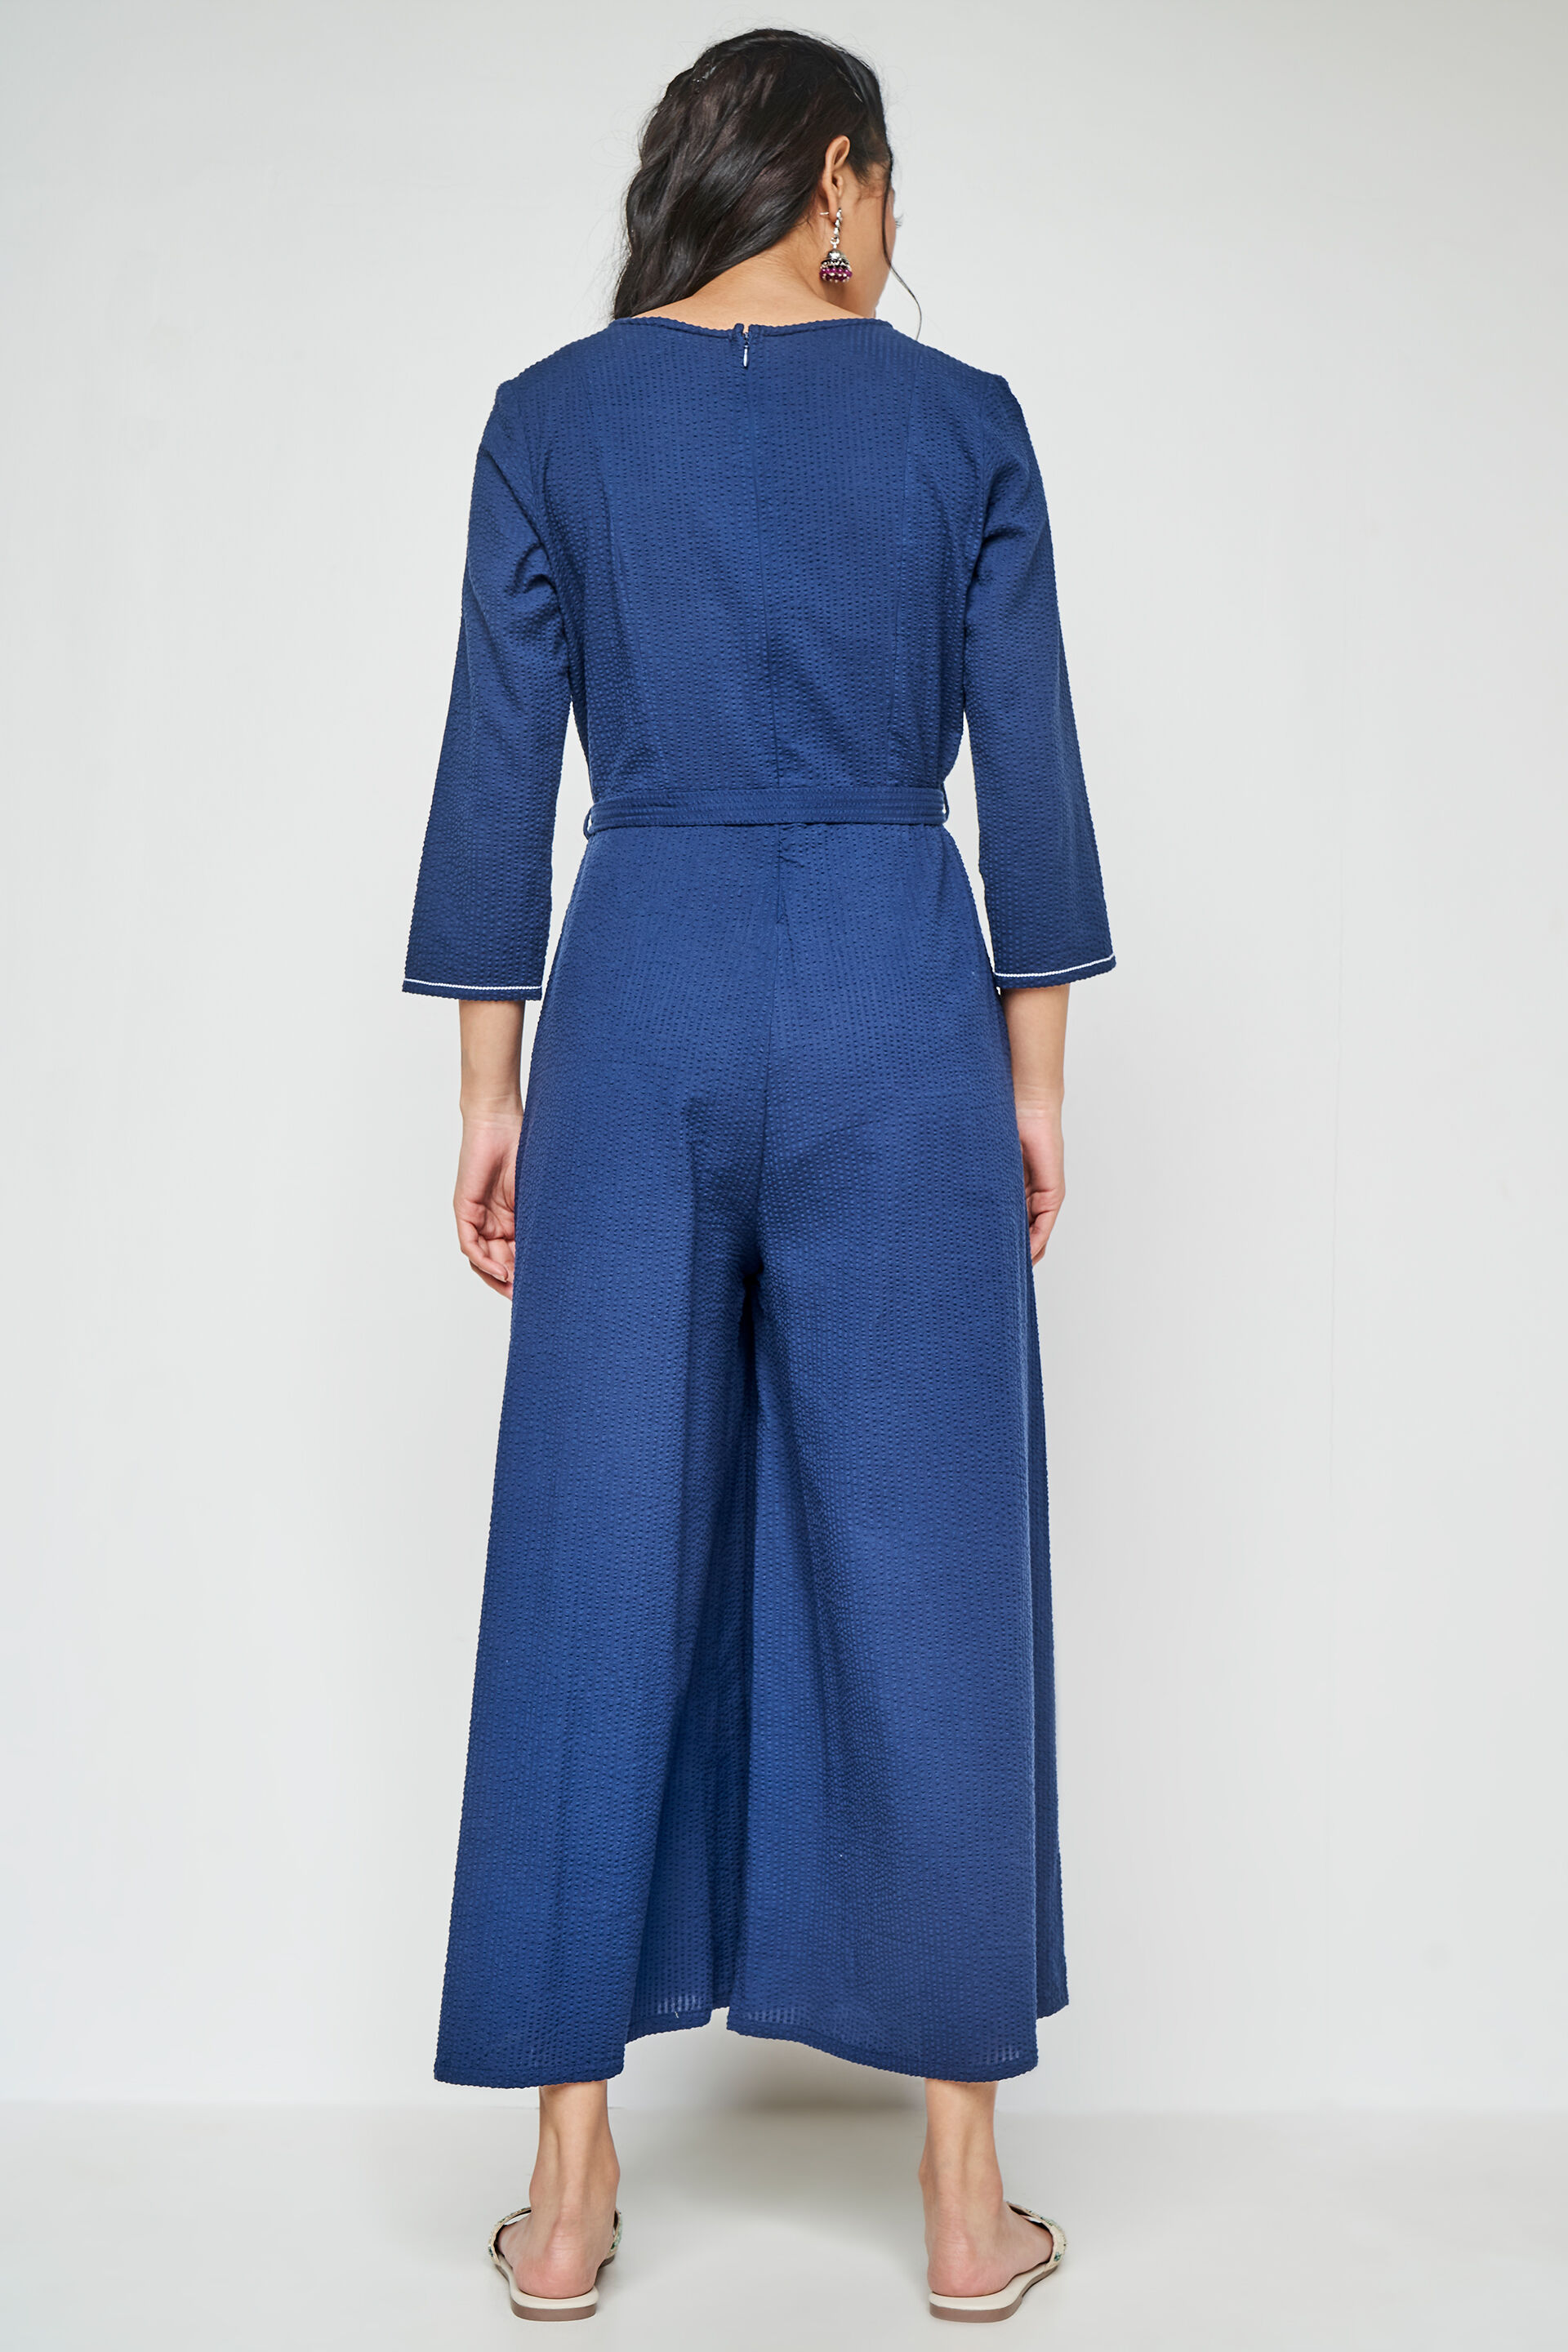 Jumpsuits for Women: Best-Selling Jumpsuits for Women starting at Rs. 599 -  The Economic Times